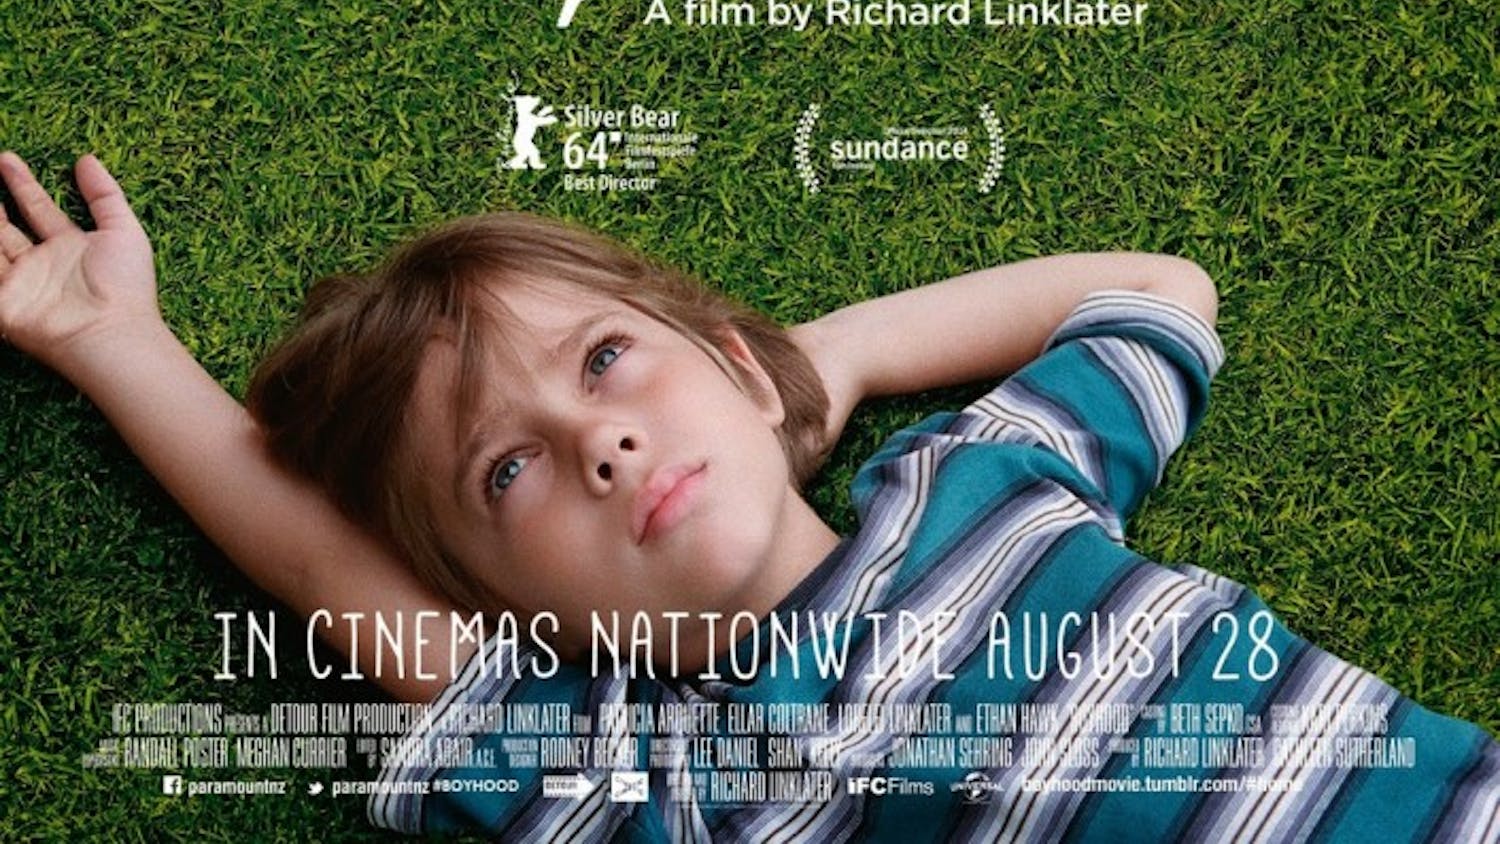 Richard Linklater's summer flick "Boyhood" wowed audiences and critics alike by capturing the recent past.